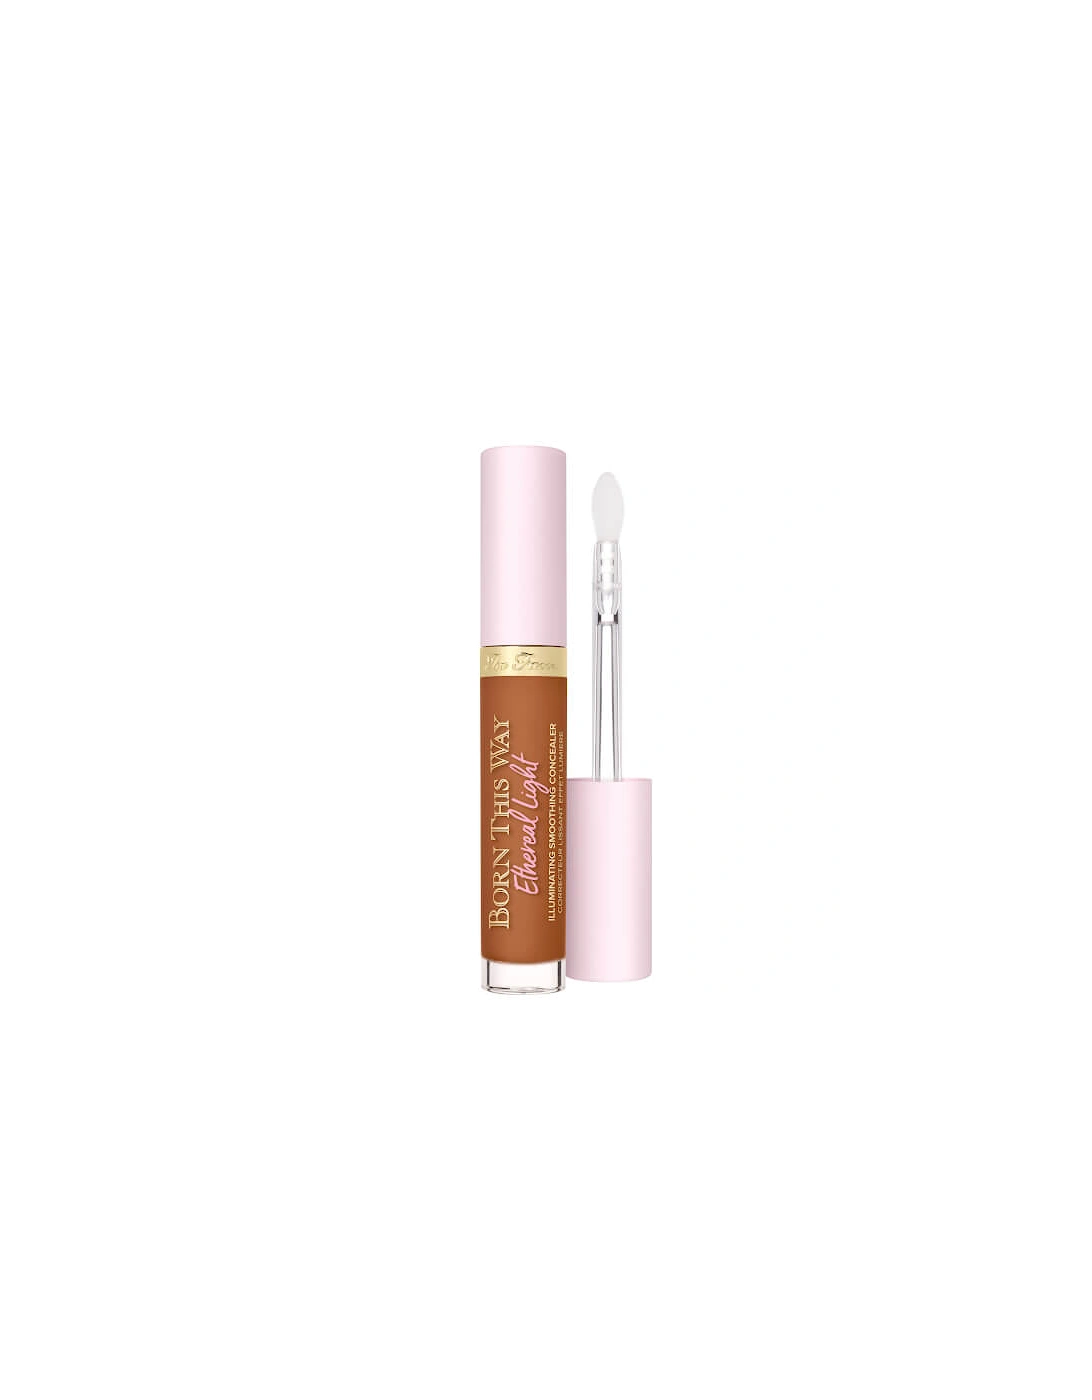 Born This Way Ethereal Light Illuminating Smoothing Concealer - Caramel Drizzle, 2 of 1